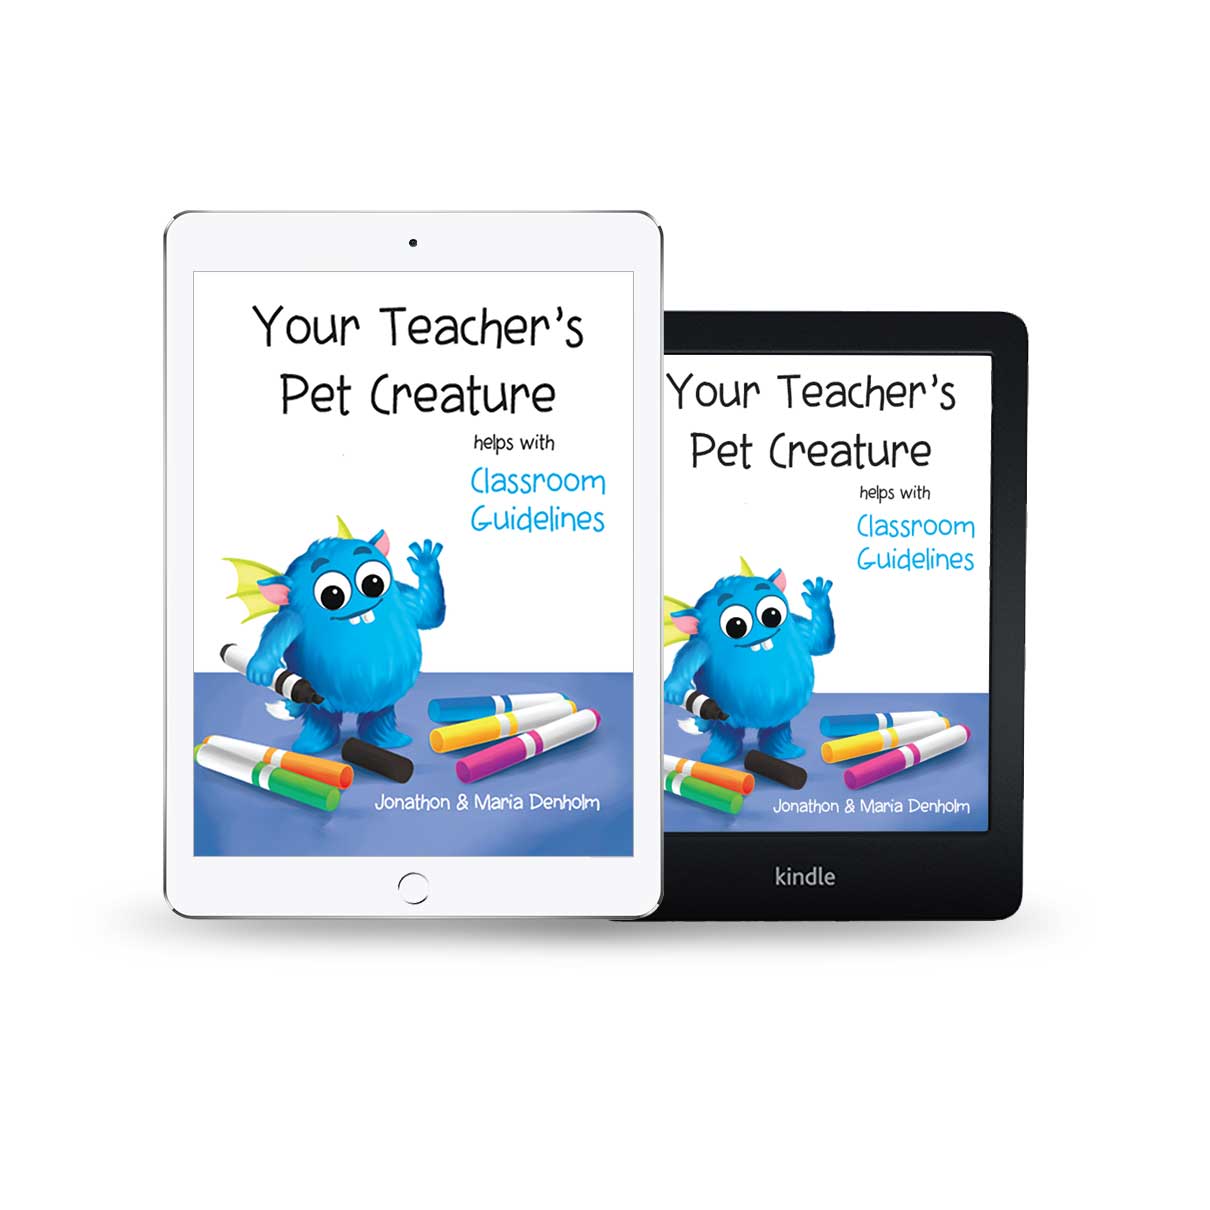 YTPC - Helps With Classroom Guidelines - E-book - Your Teacher's Pet Creature